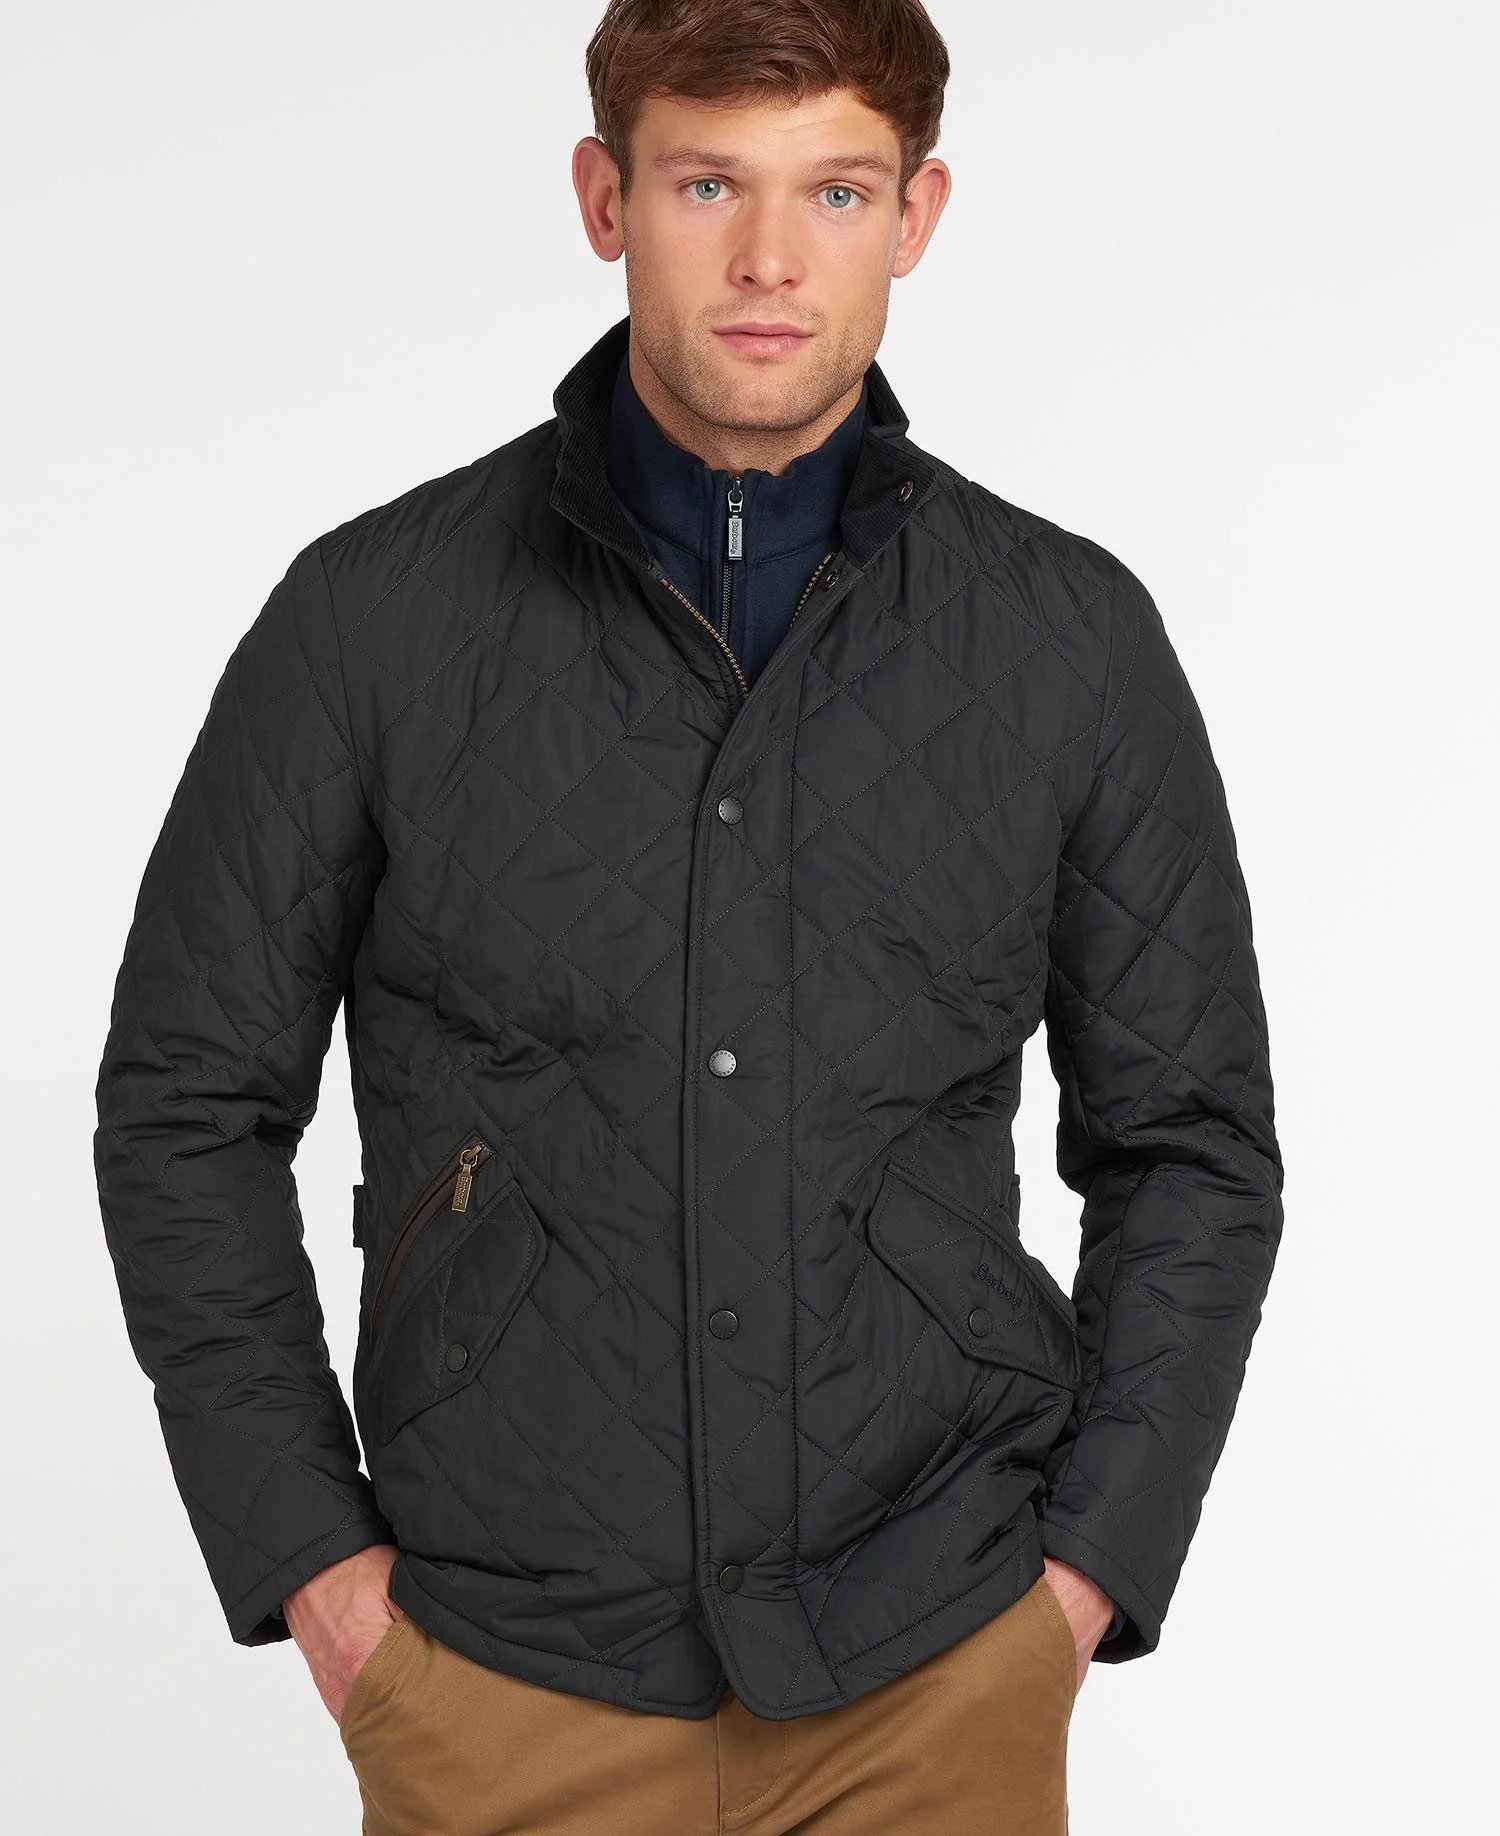 What is the Most Popular Barbour Jacket? – The QG